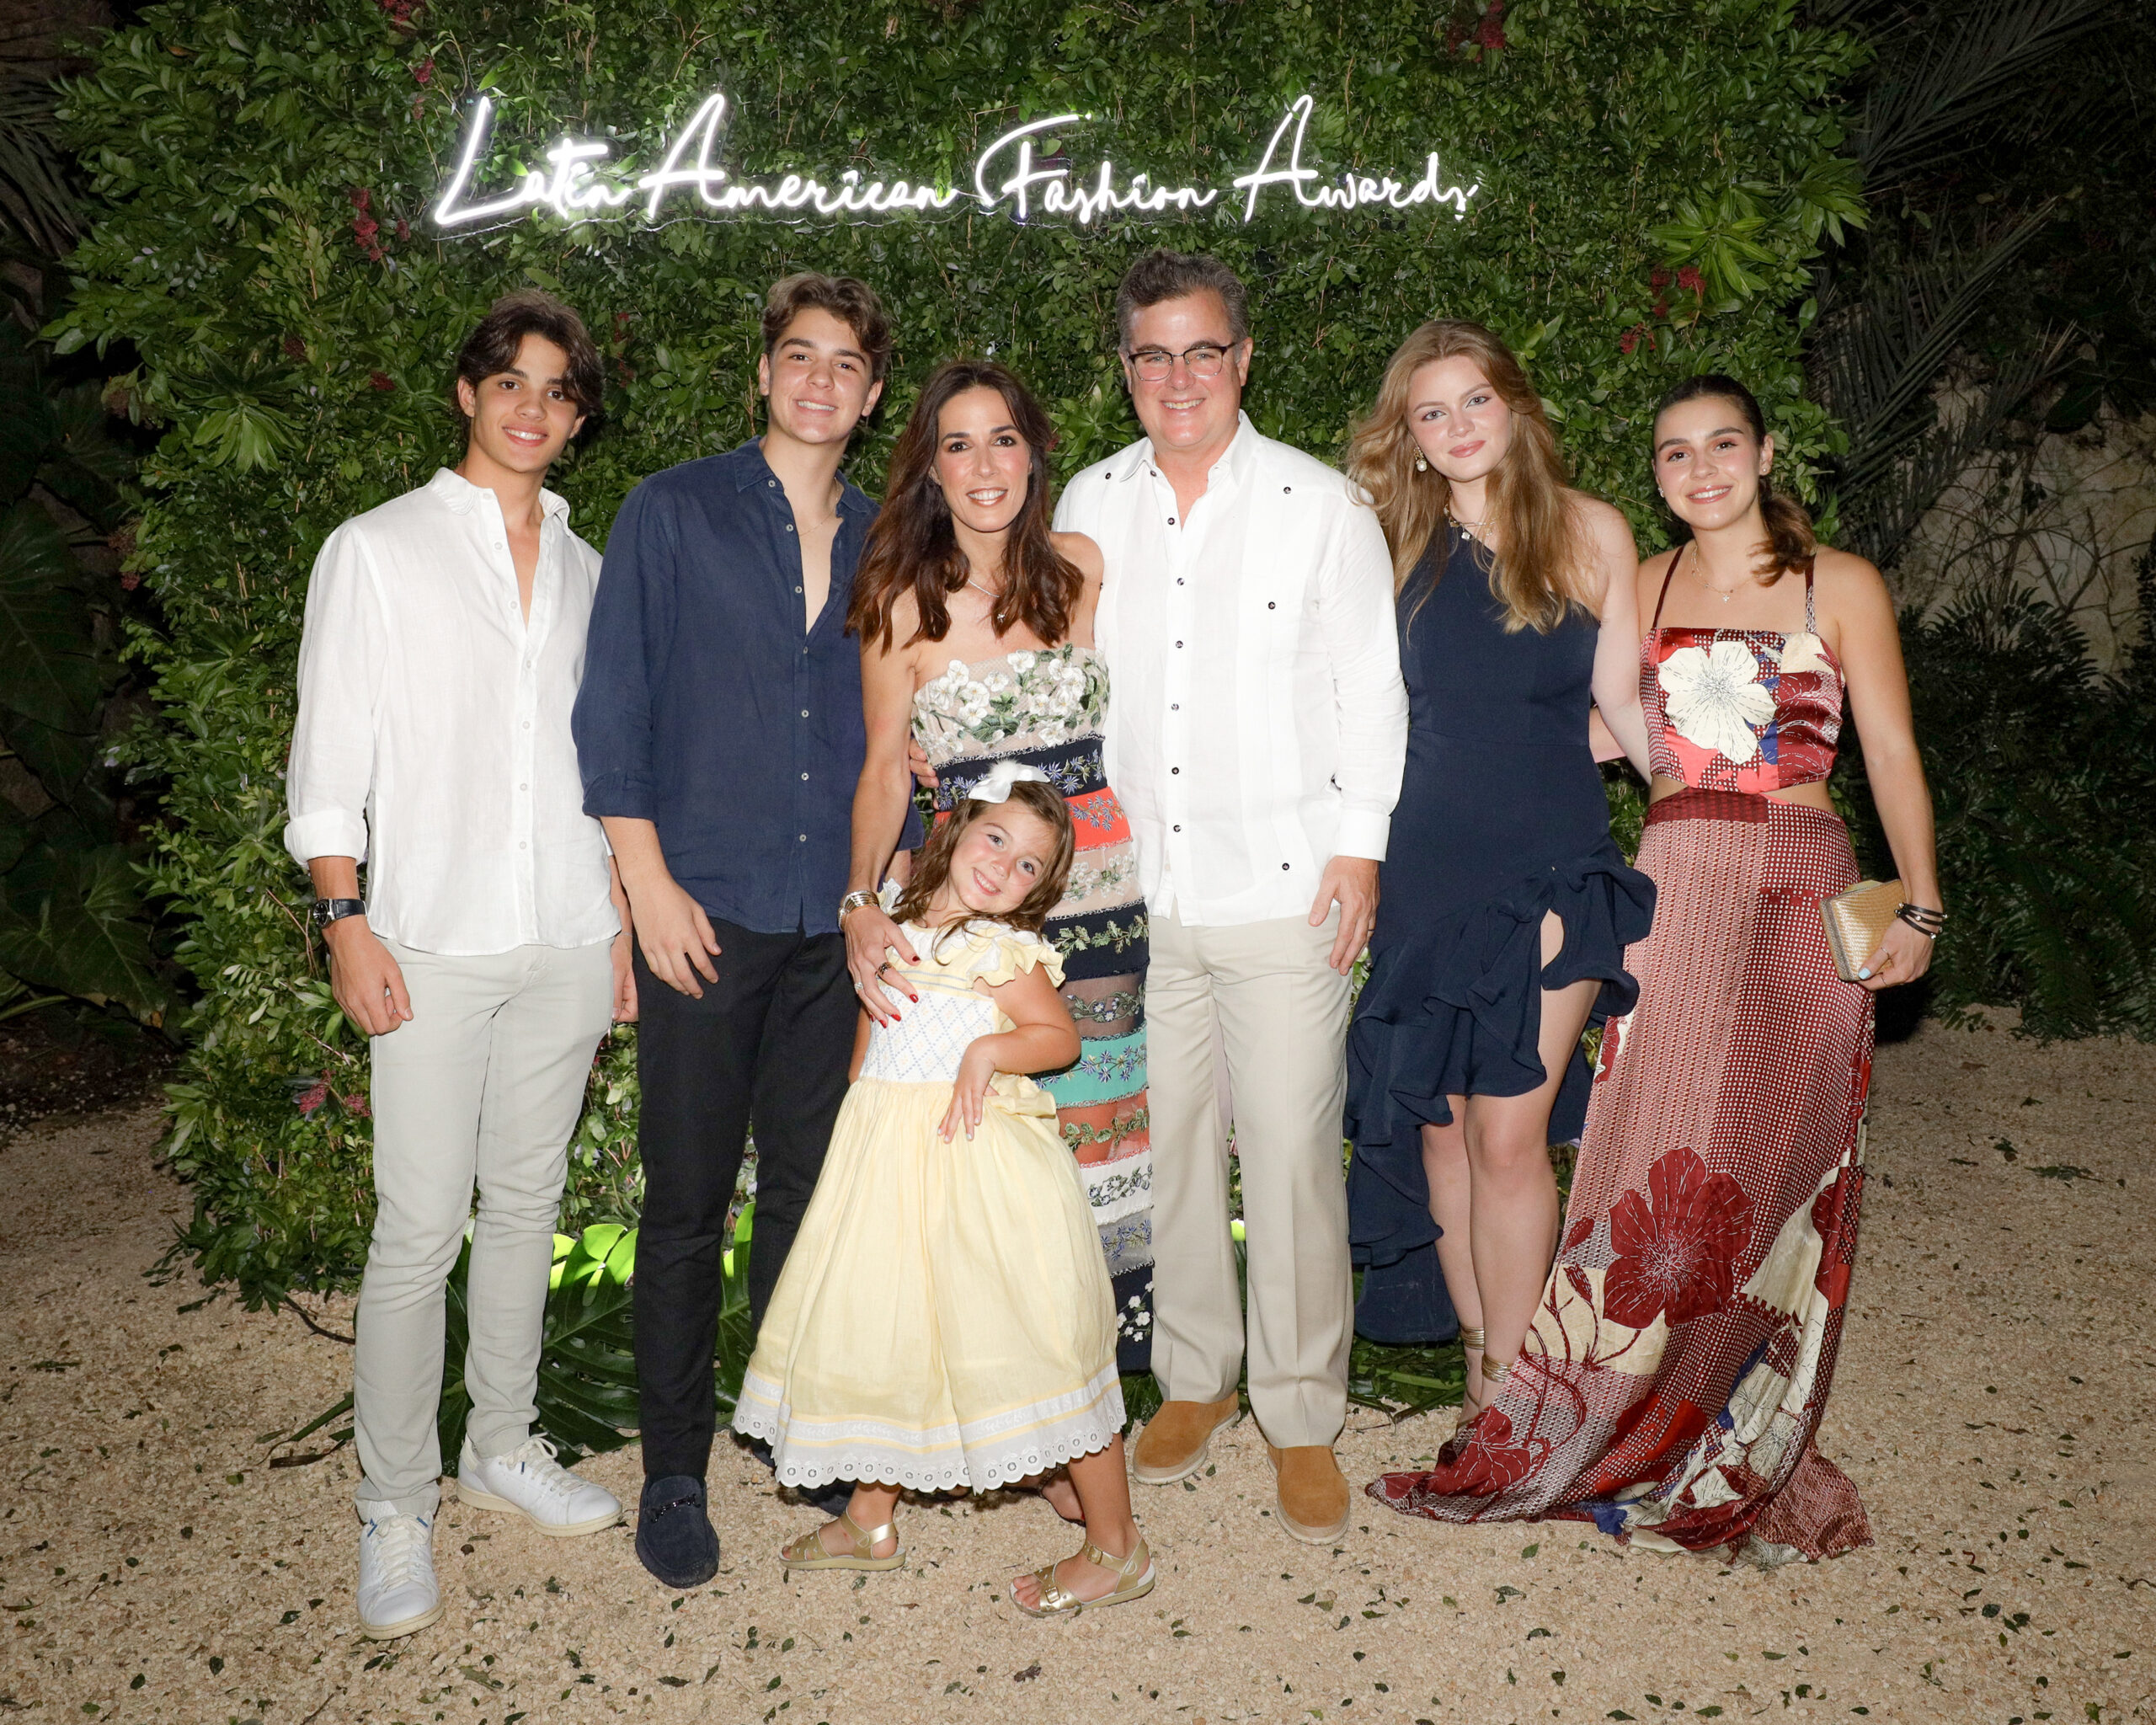 &quot;A moment of radiance: Silvia Argüello, surrounded by her family, captures the joy and familial bonds at the Latin American Fashion Awards, set against an oasis of greenery.&quot;